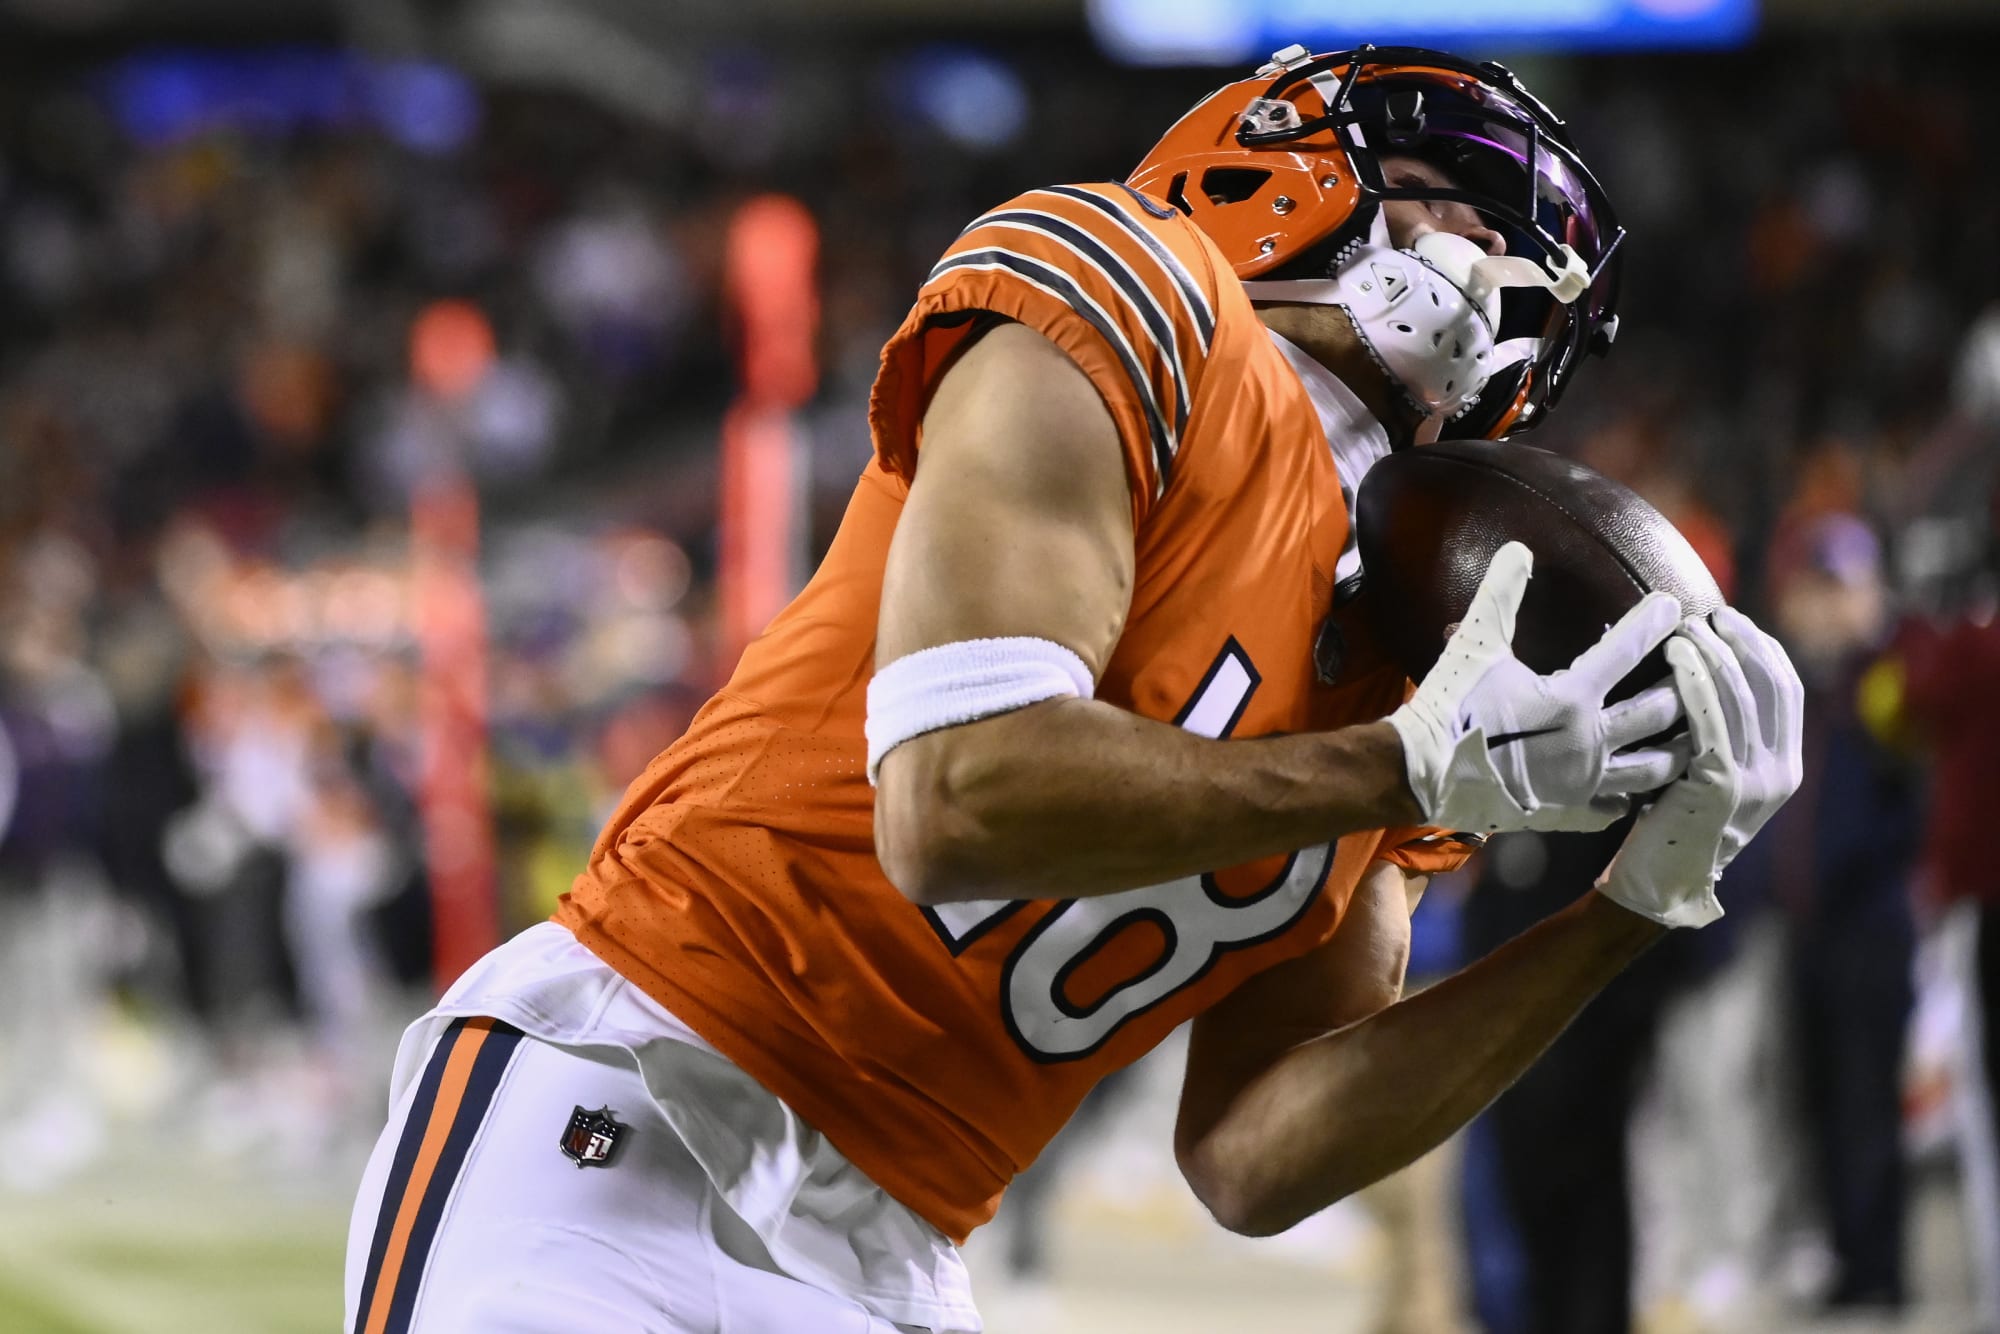 This Chicago Bears wide receiver is starting to lose playing time